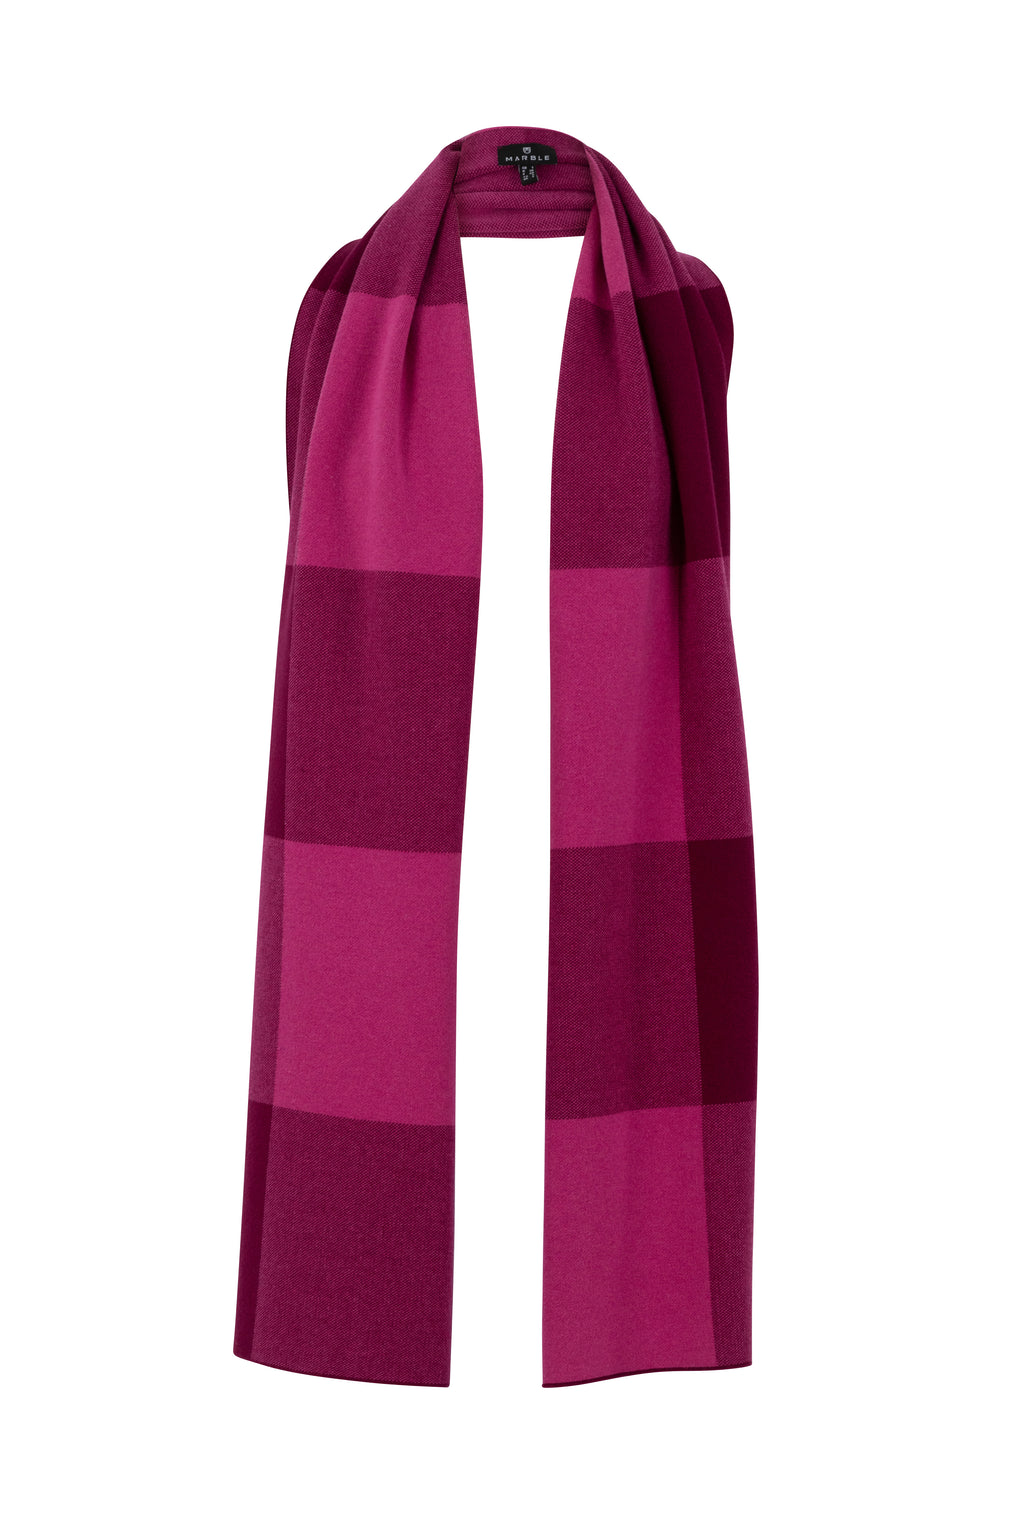 Elevate your winter style with our Wine Pink Tones Square Pattern Long Line Woven Knit Scarf. Crafted with care, this fashionable accessory adds a touch of sophistication to any ensemble. Stay cozy and chic all season long.  Available at Evelin Brandt boutique for all your boutique fashion online